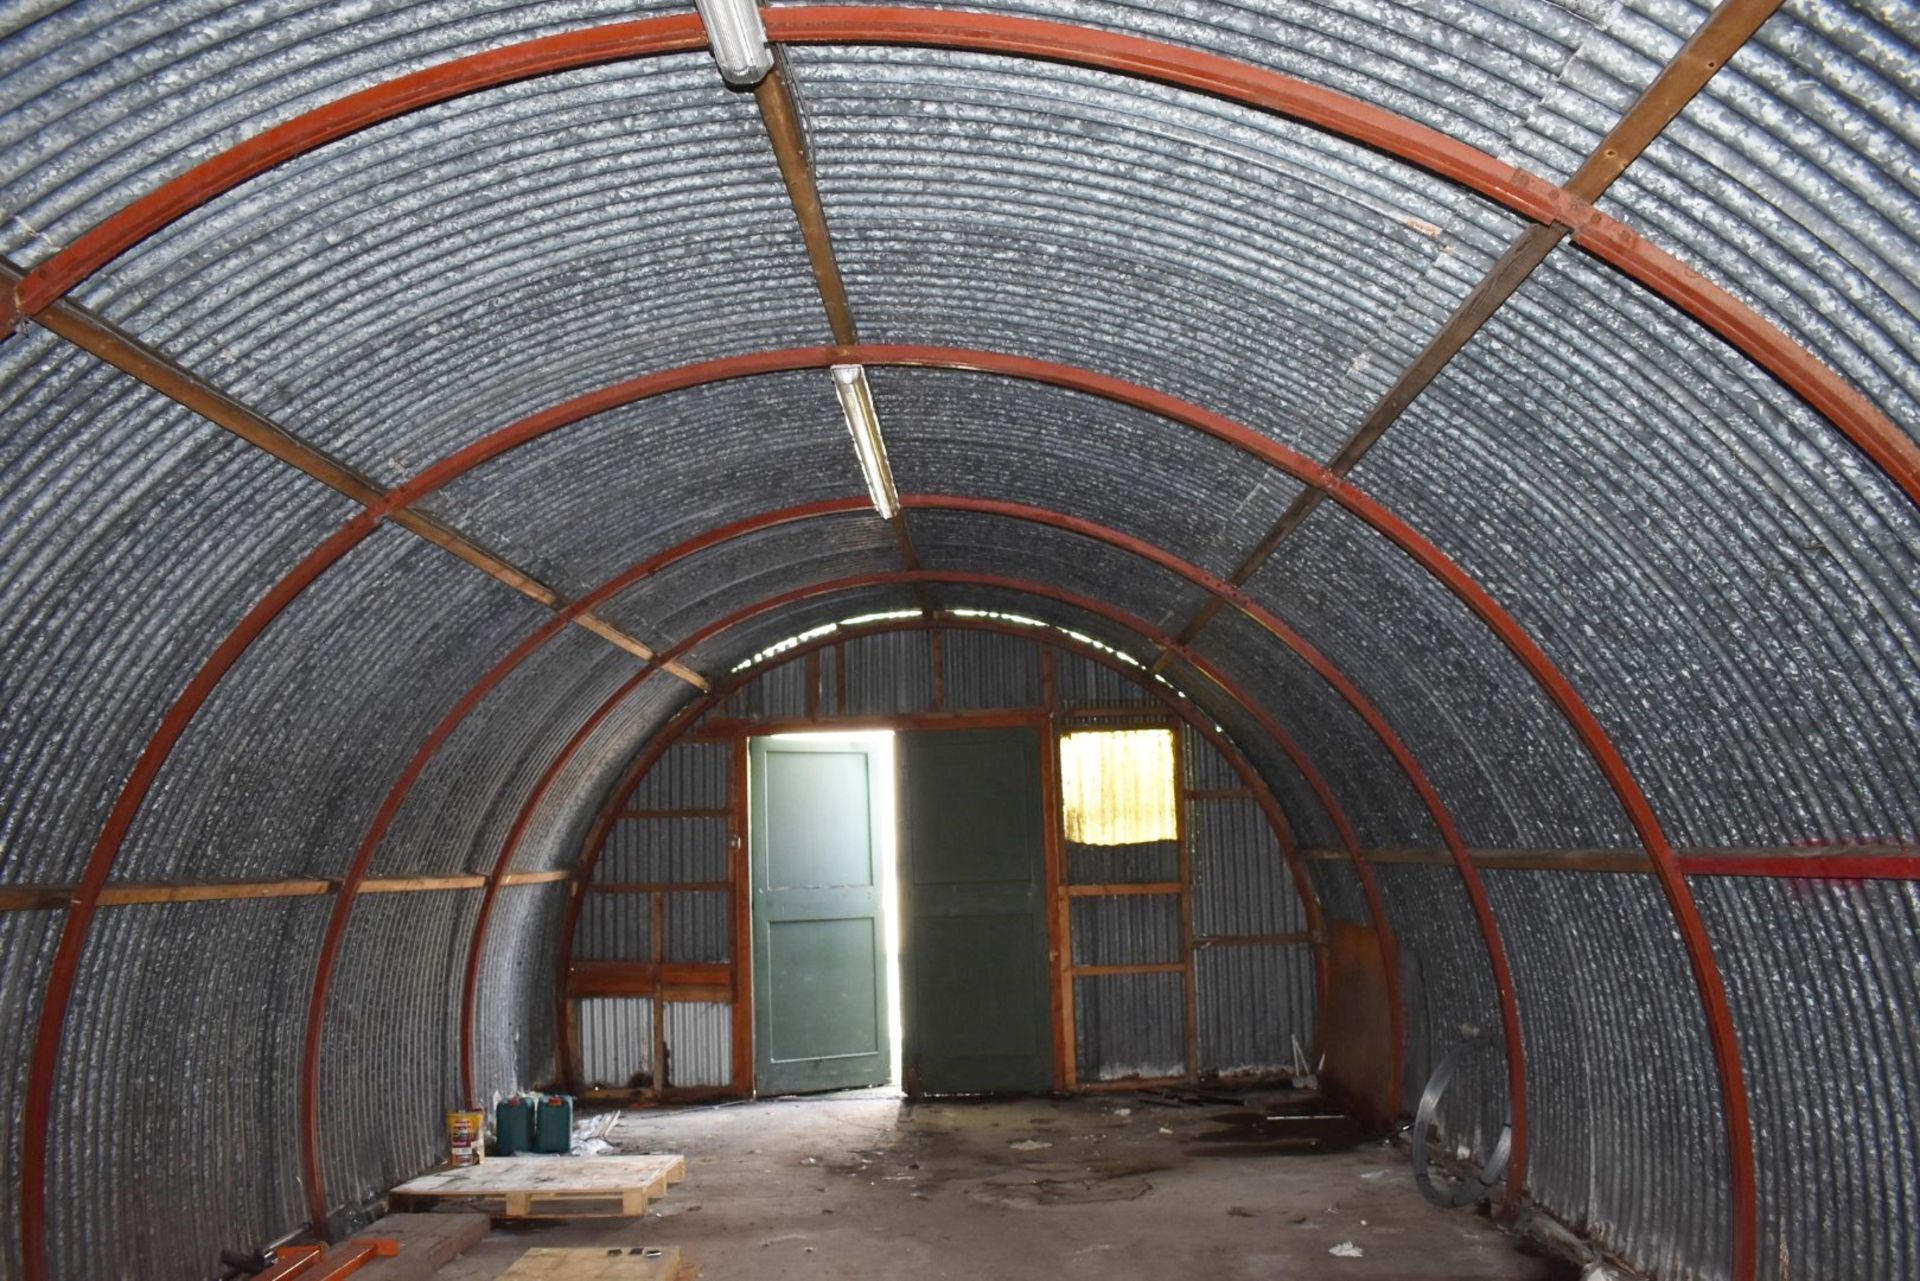 1 x Quonset Storage Building With Hinged Doors - Lightweight Steel Structure - H318 x L1110 x W500 - Image 4 of 9